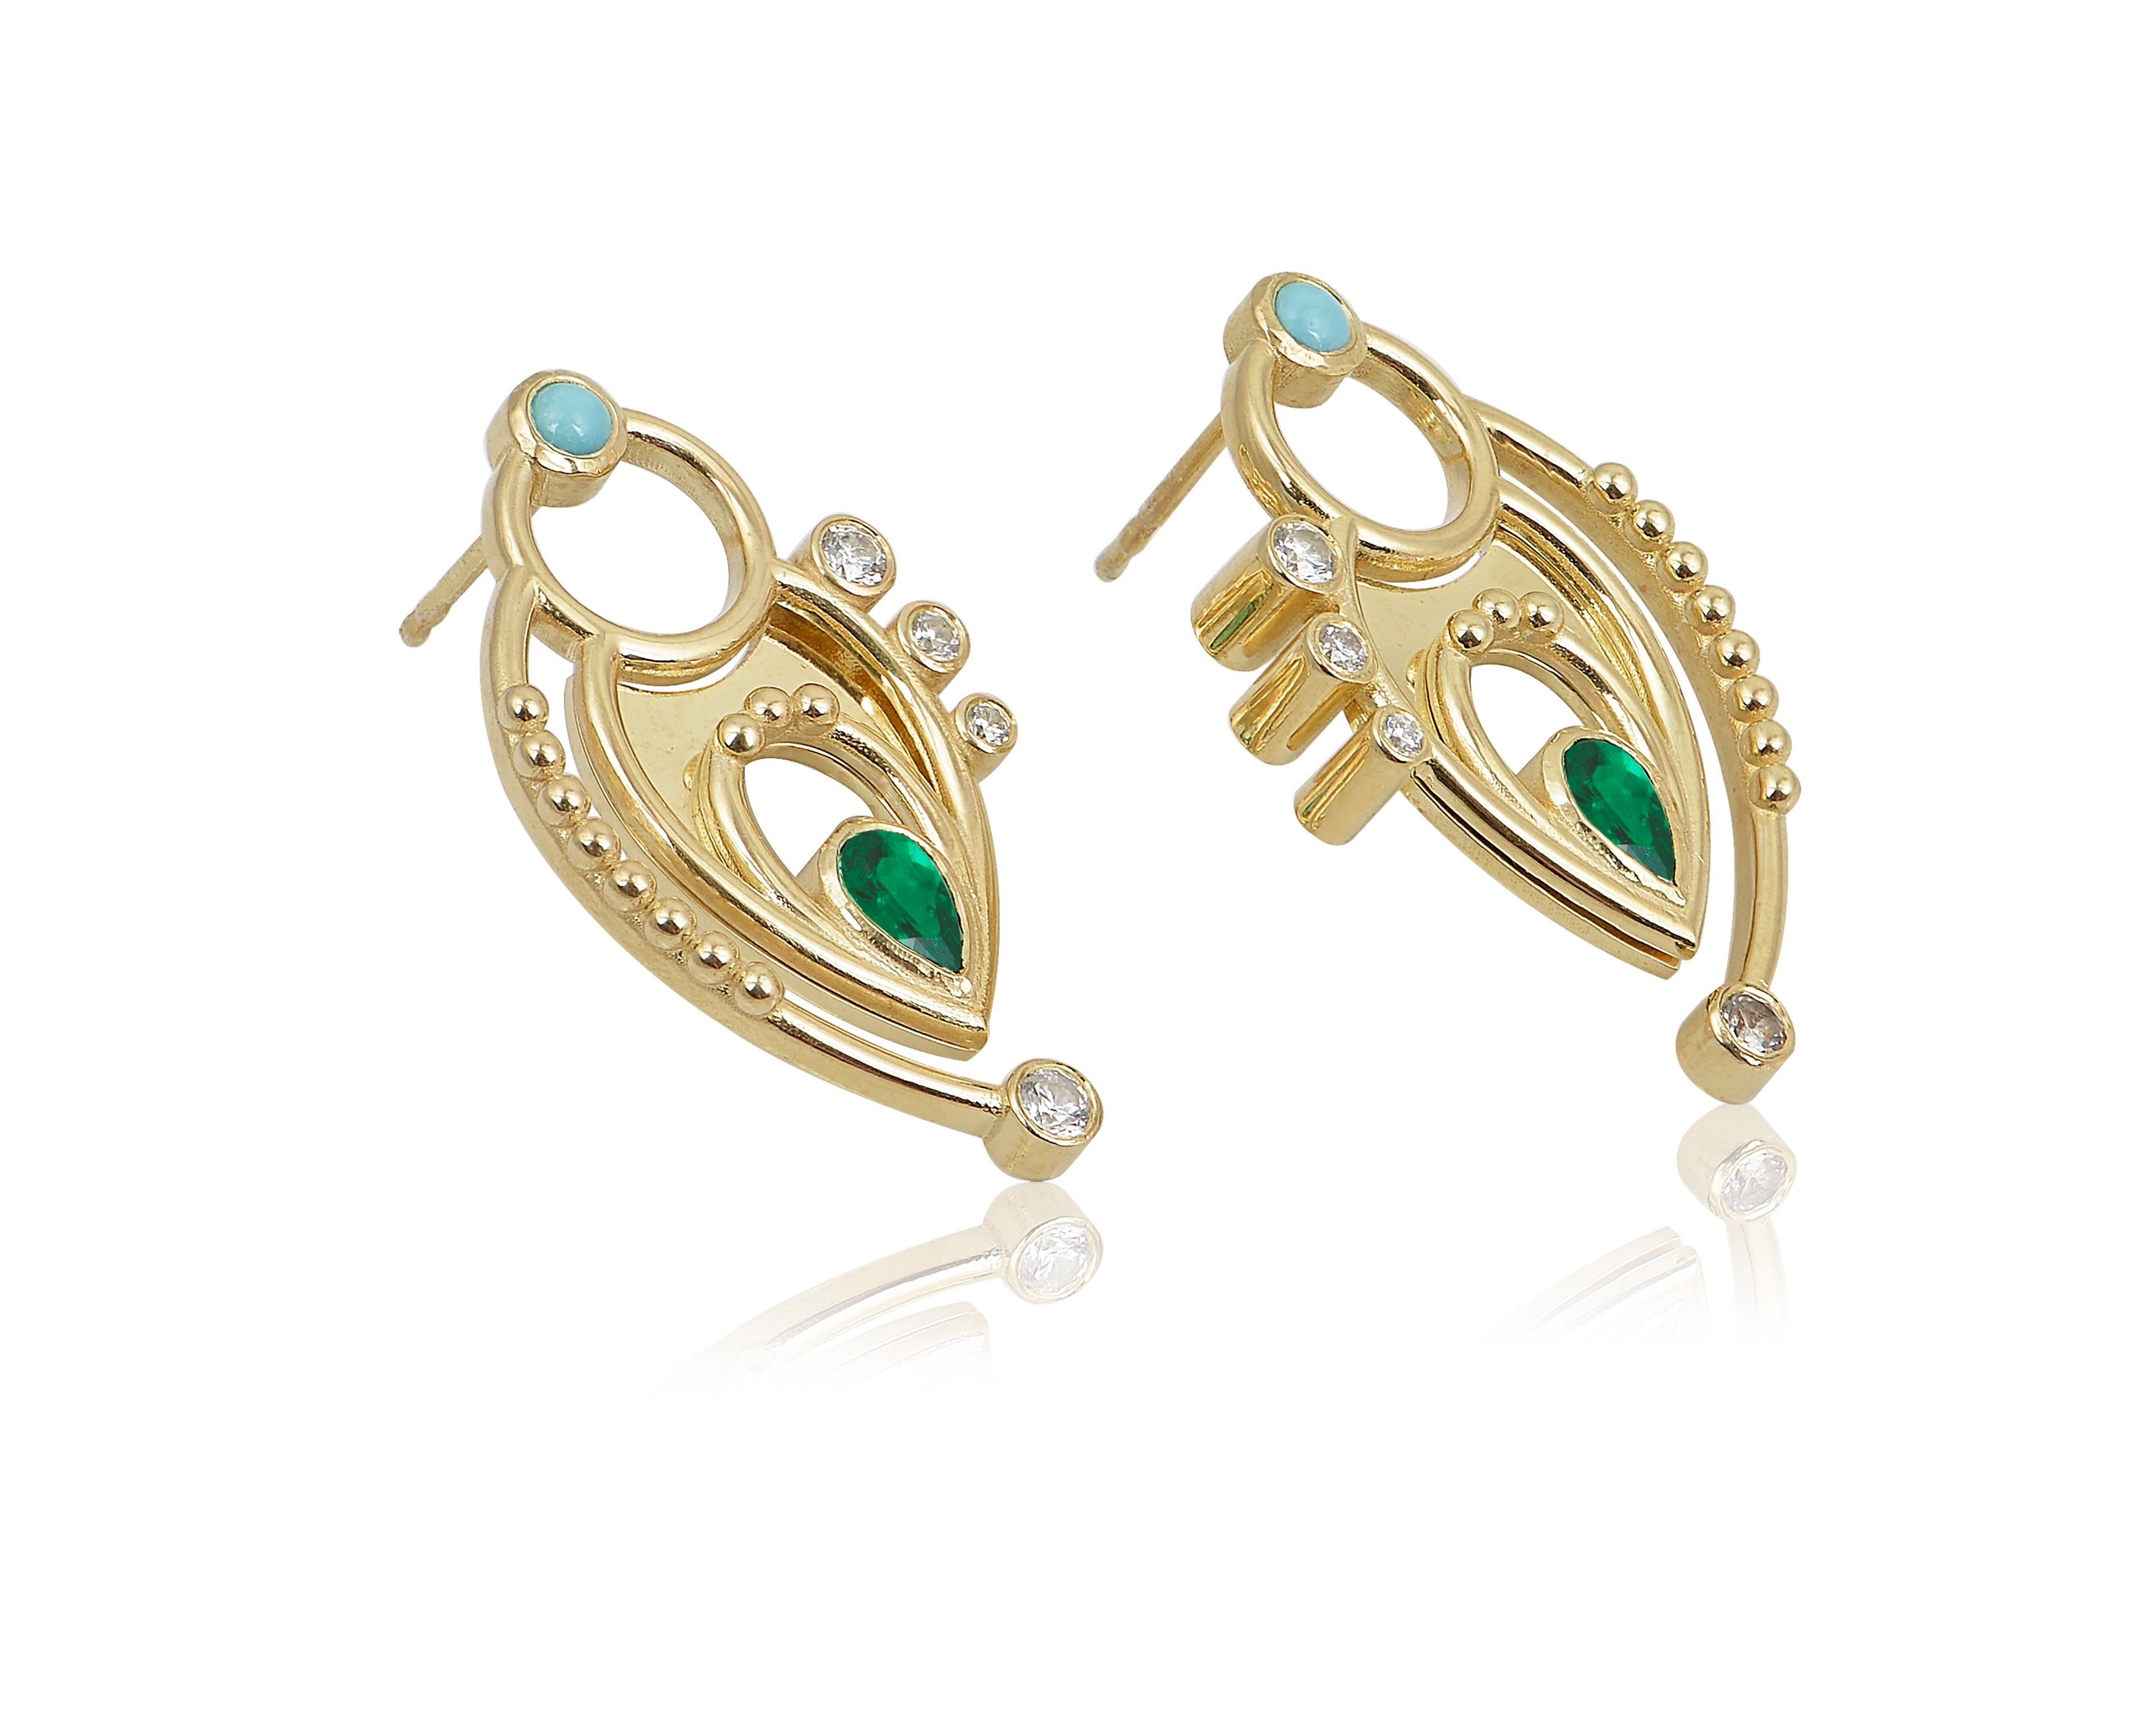 Pear Cut Pear Shaped Earrings in 18 Karat Yellow Gold with Diamonds, Emeralds, Turquoise For Sale